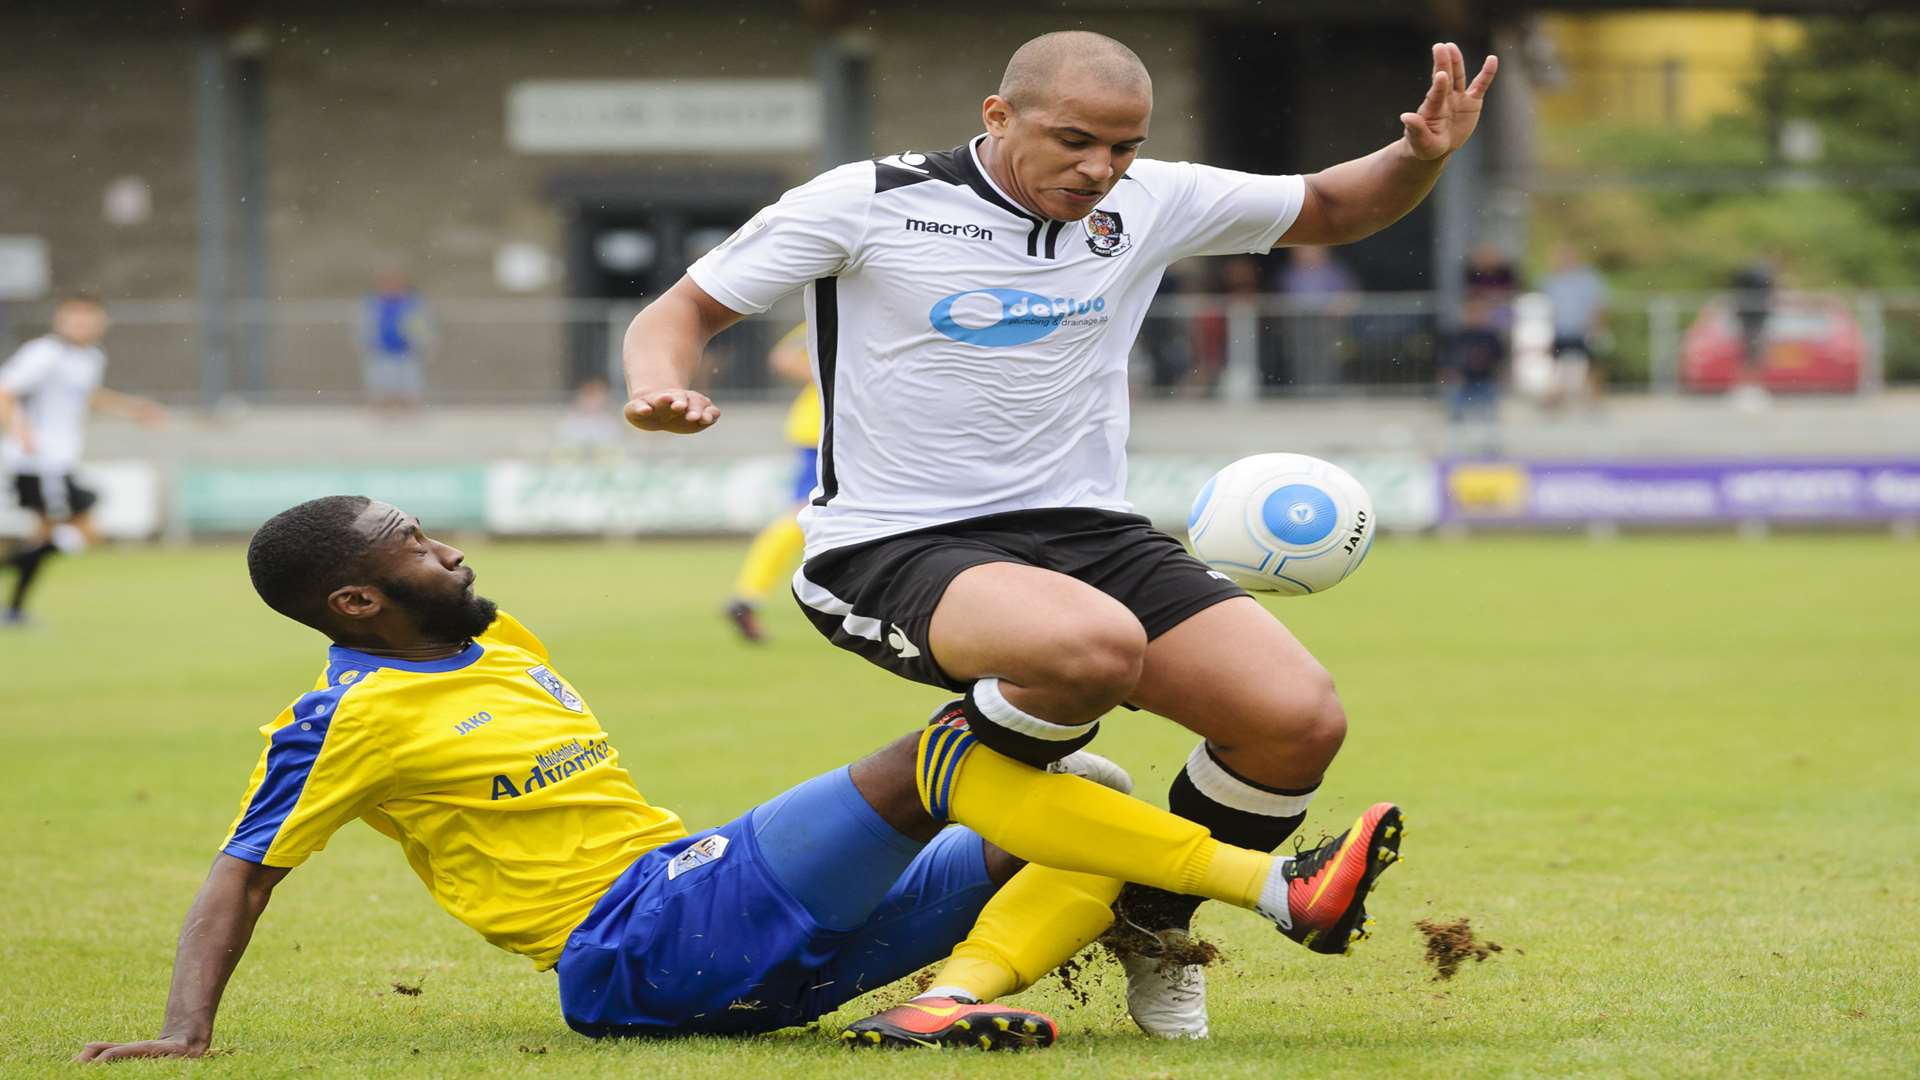 Dartford left-back Tom Wynter is challenged against Maidenhead earlier in the season. Picture: Andy Payton